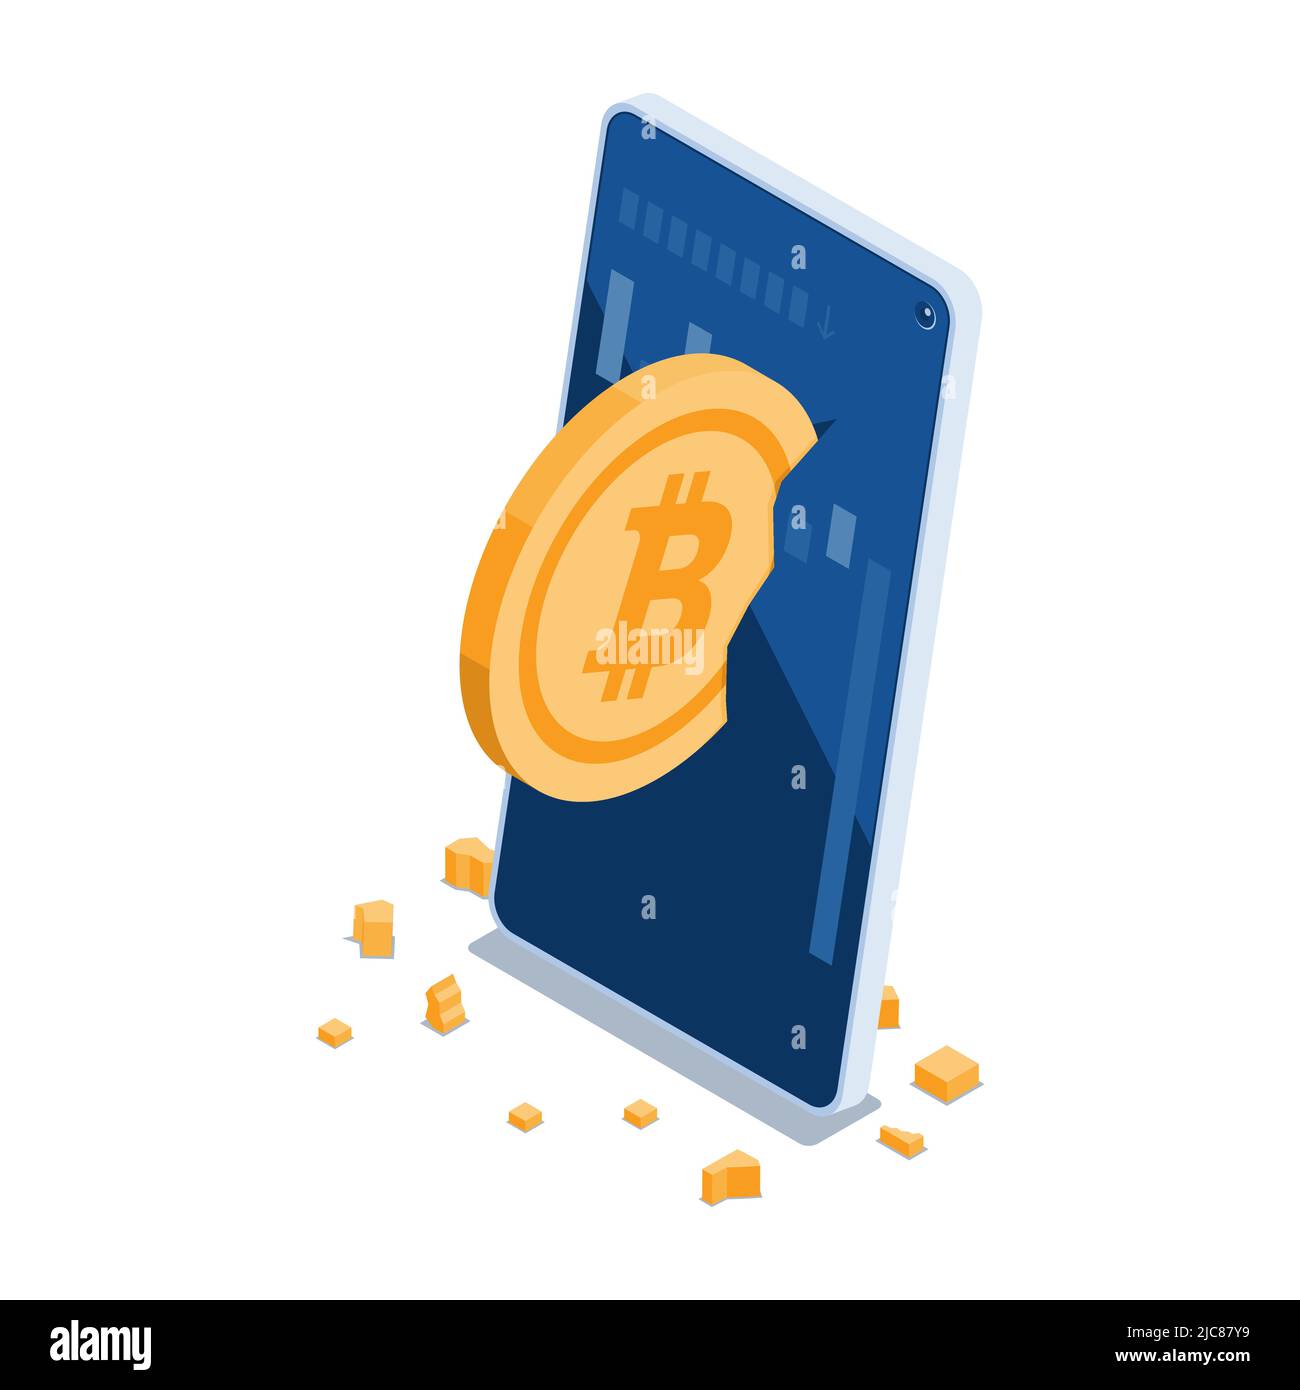 Flat 3d Isometric Bitcoin Crashed on Smartphone Screen. Cryptocurrency Market Crash Concept. Stock Vector